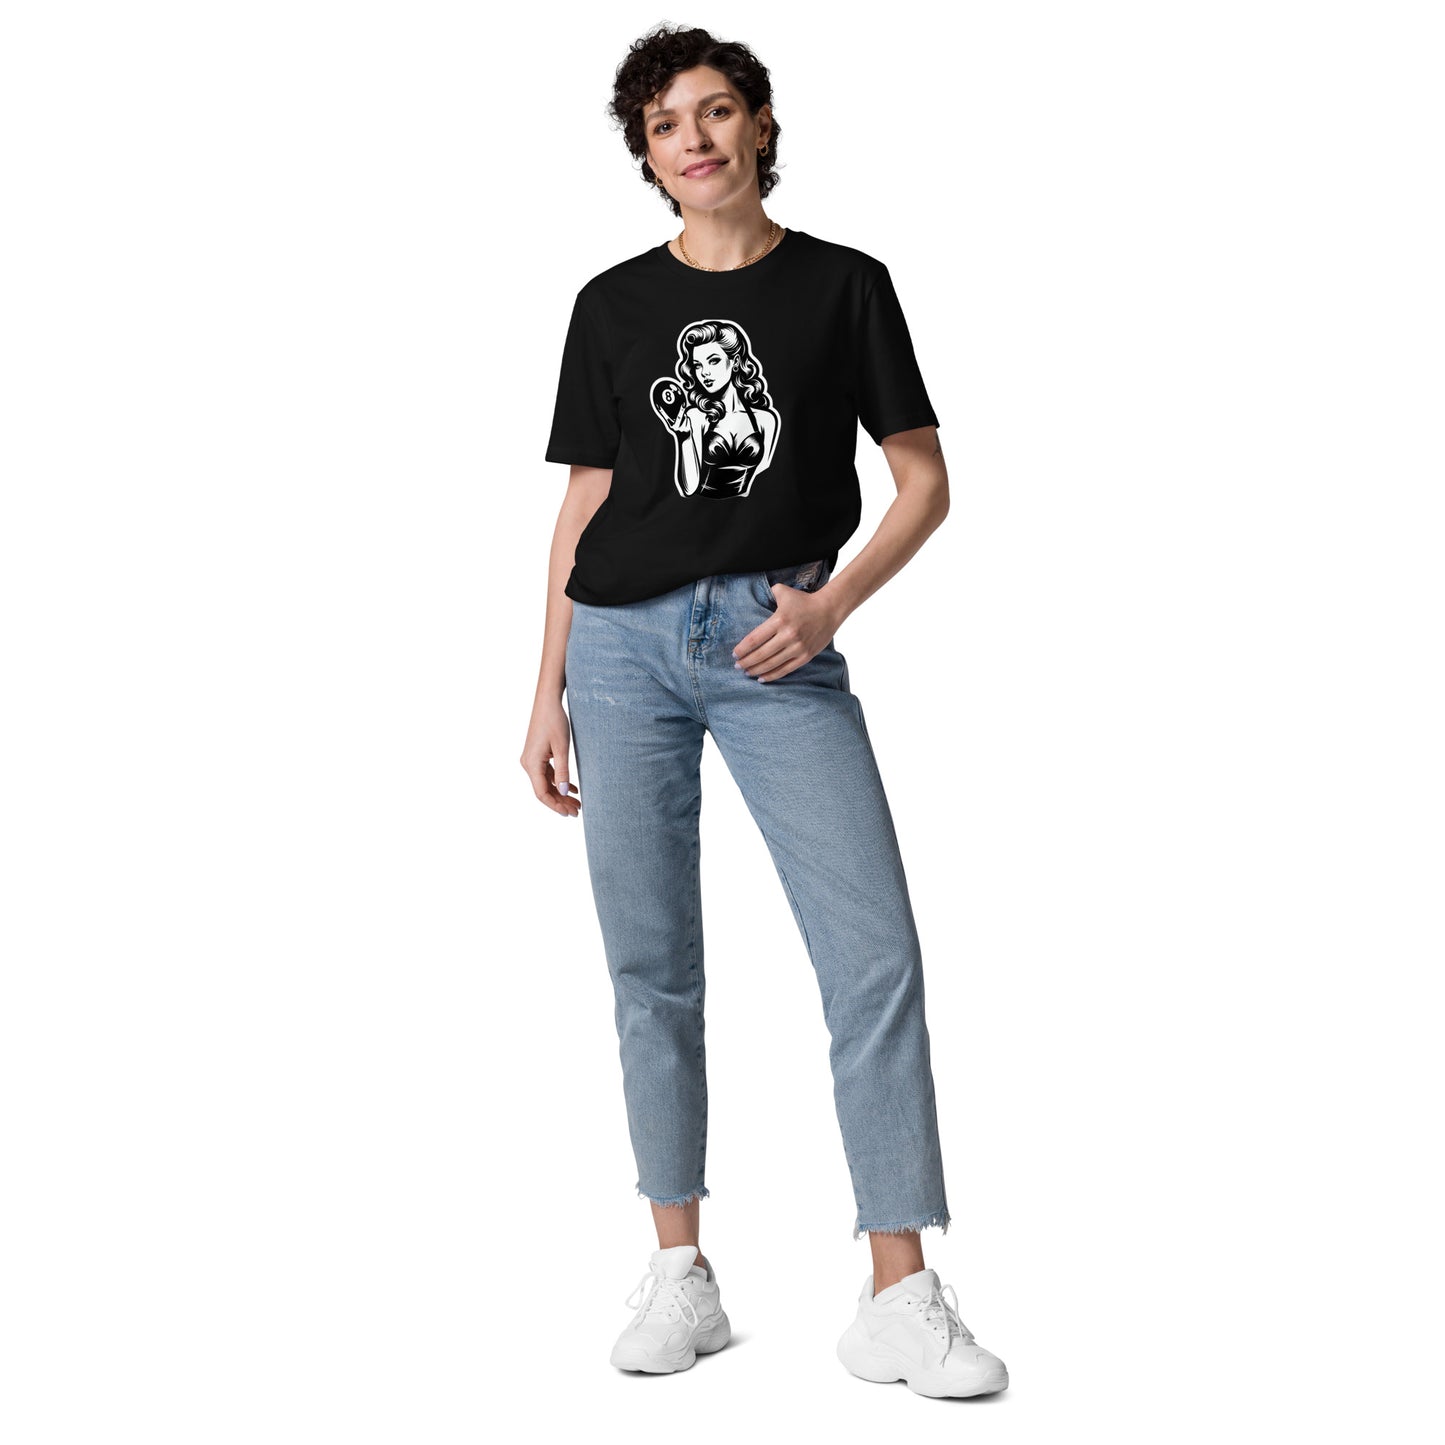 8 Ball Pin up girl fitted t-shirt